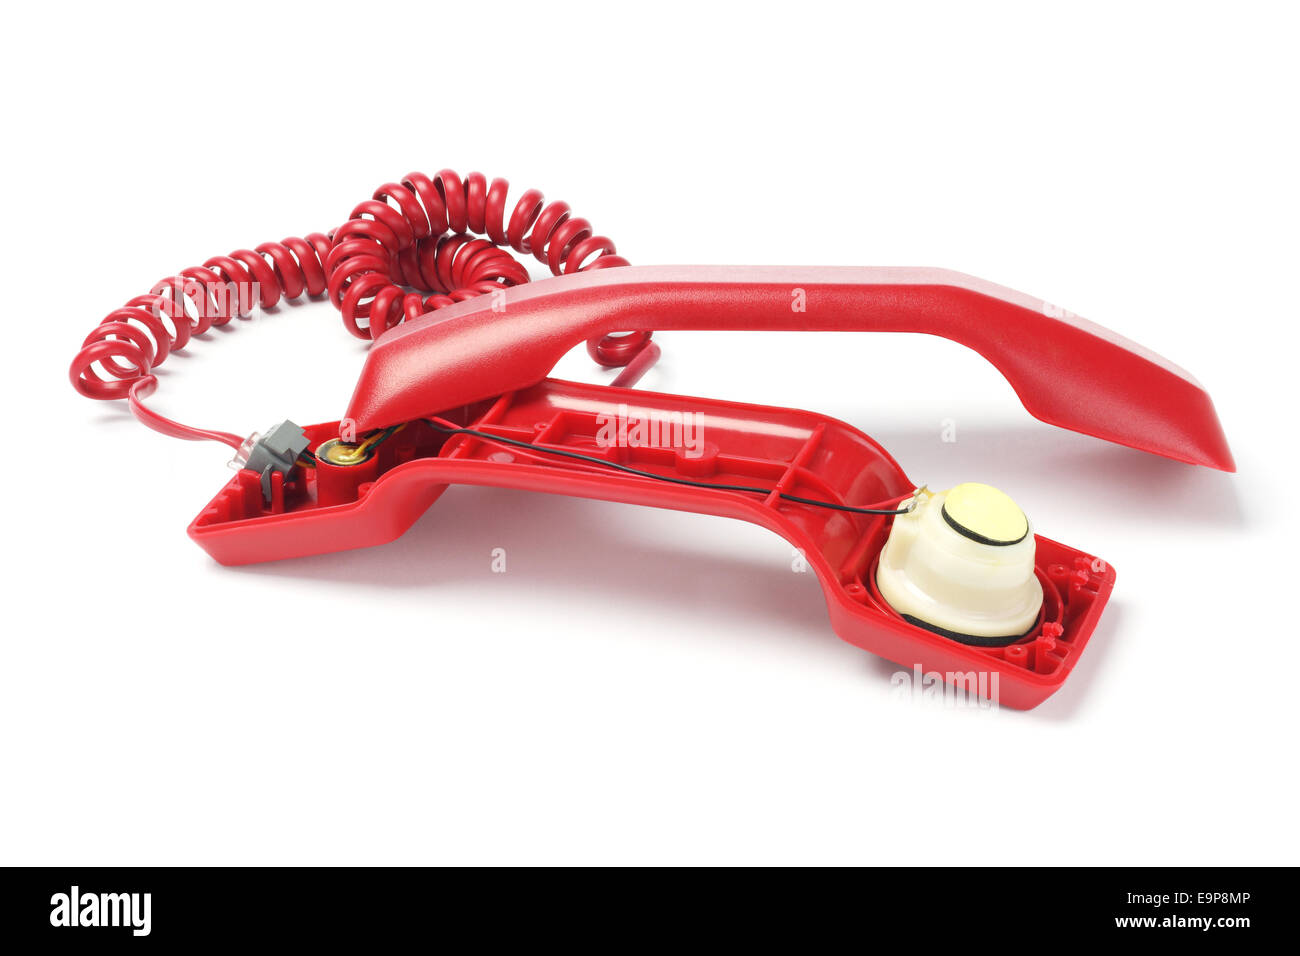 Open Red Telephone Handset Showing Internal Components Stock Photo